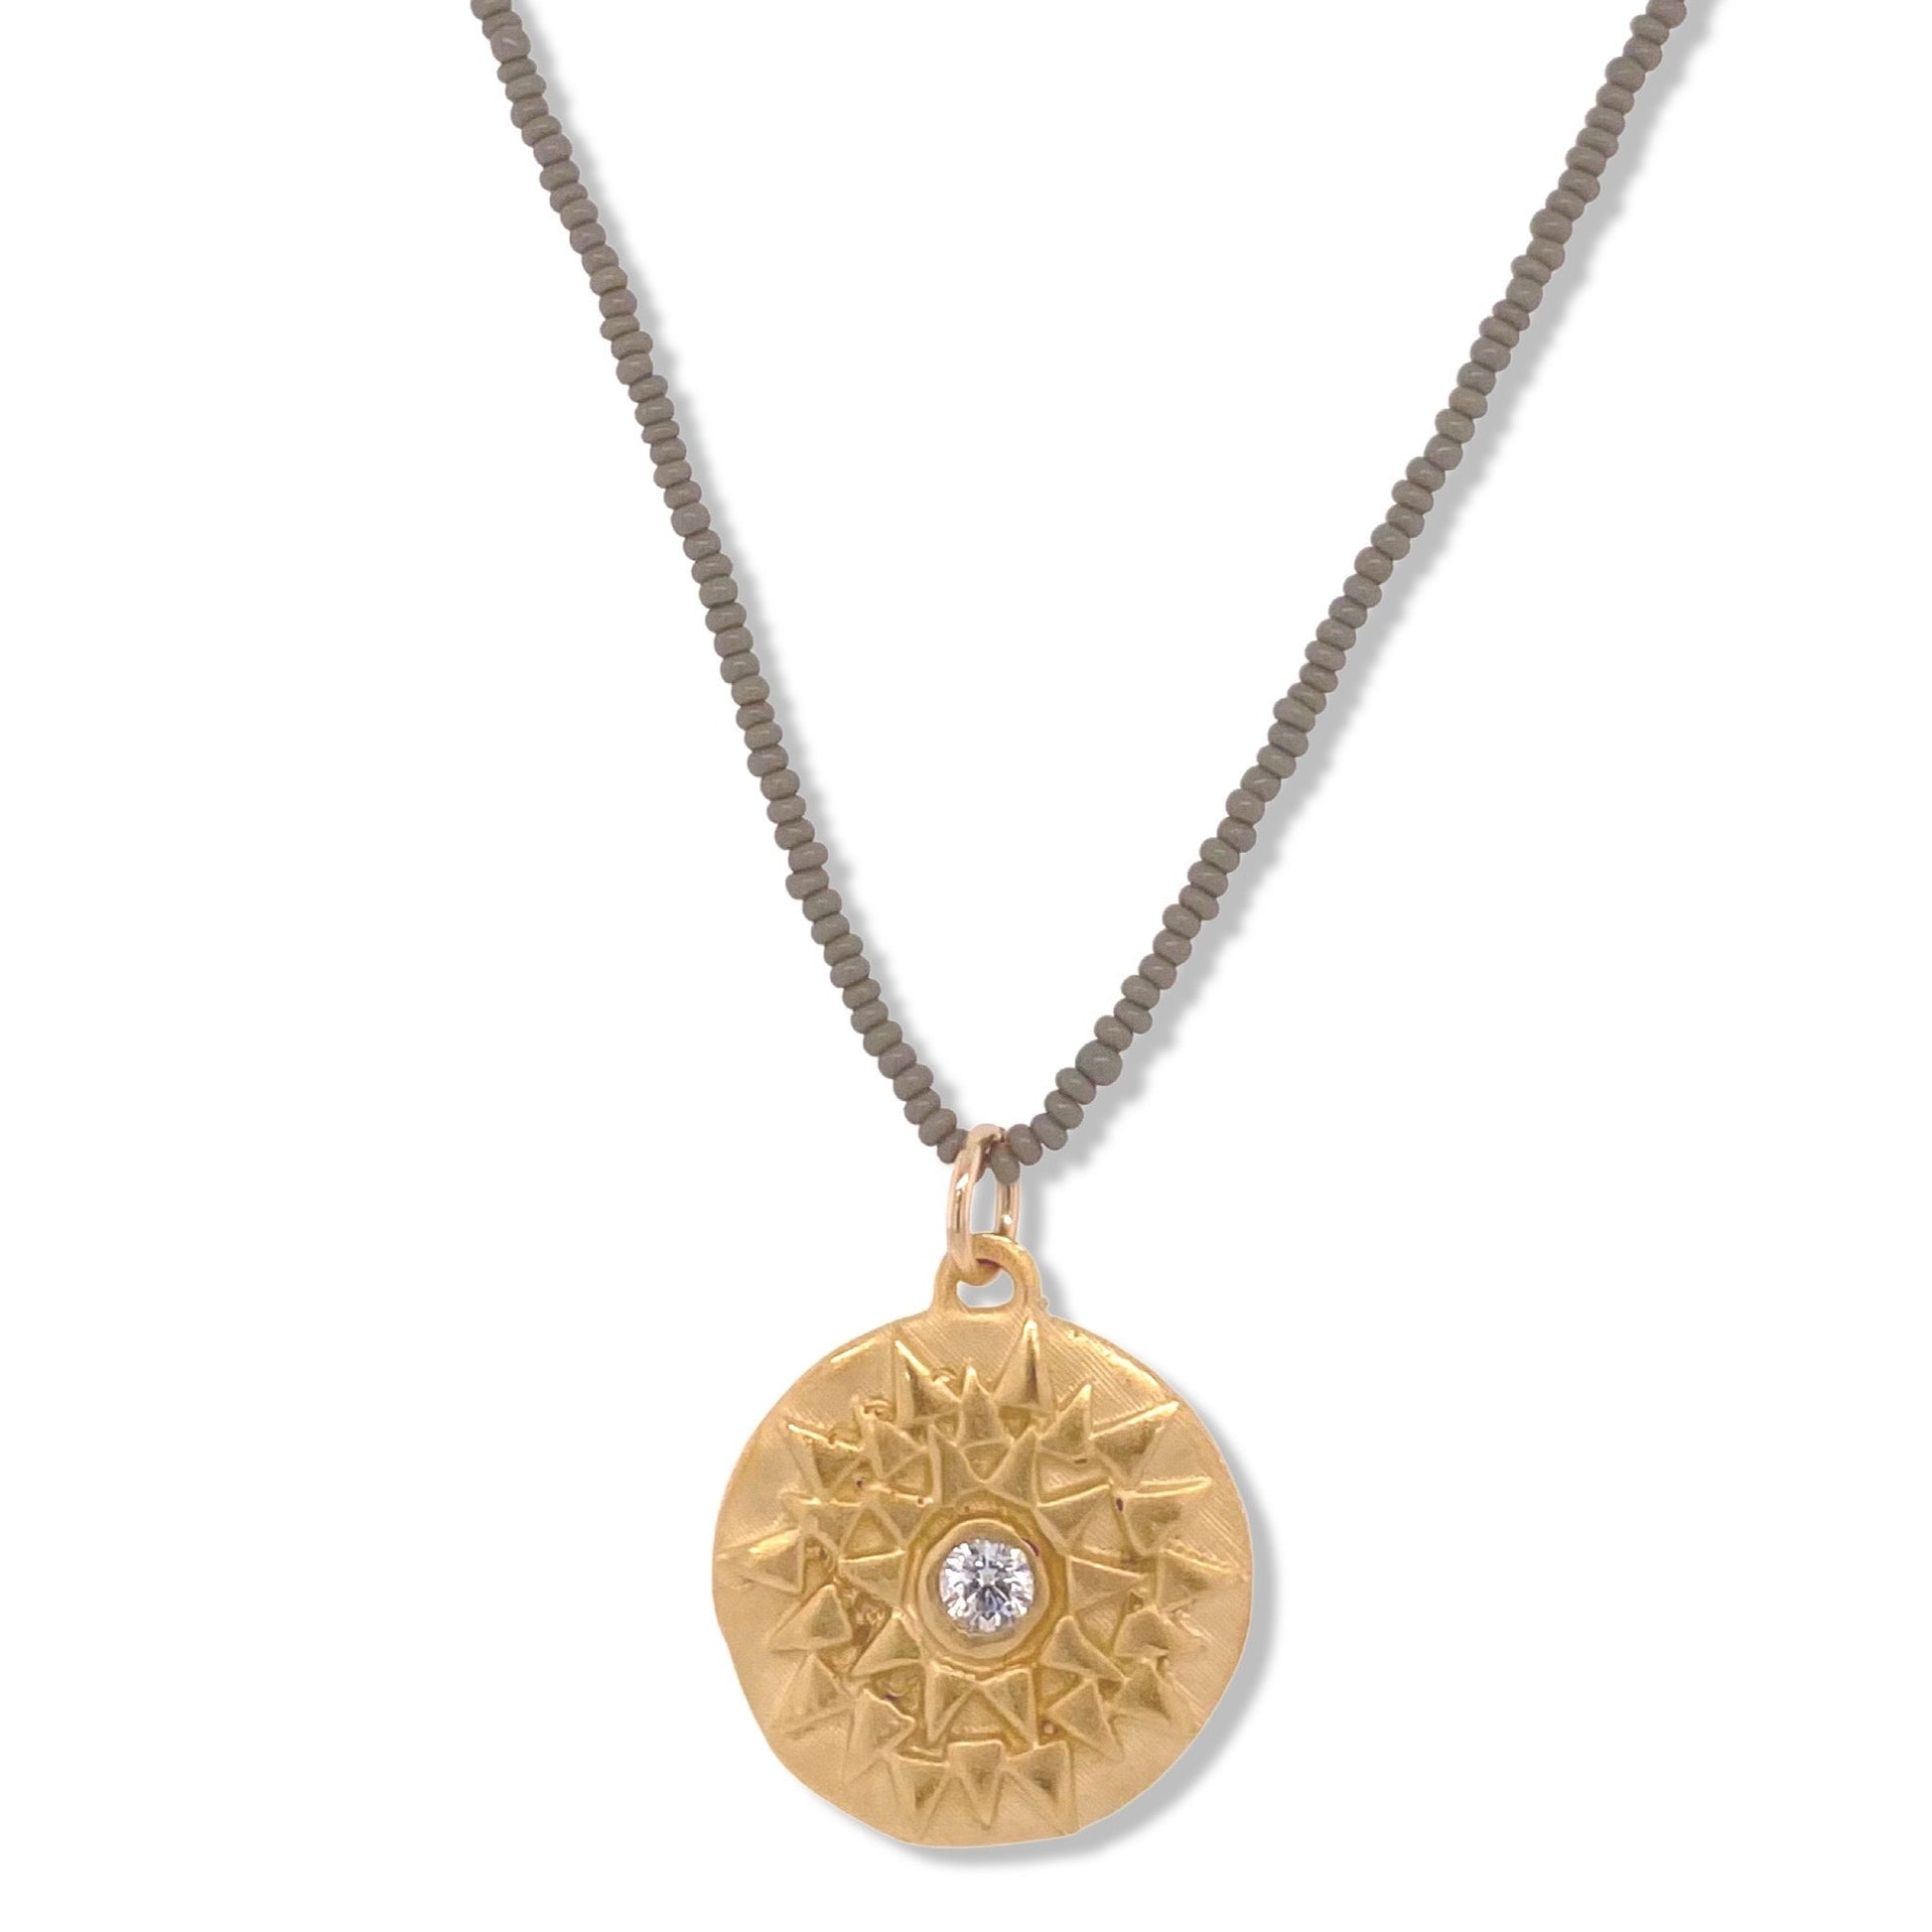 Kha Necklace in Gold on Charcoal Beads | Nalu | Nantucket